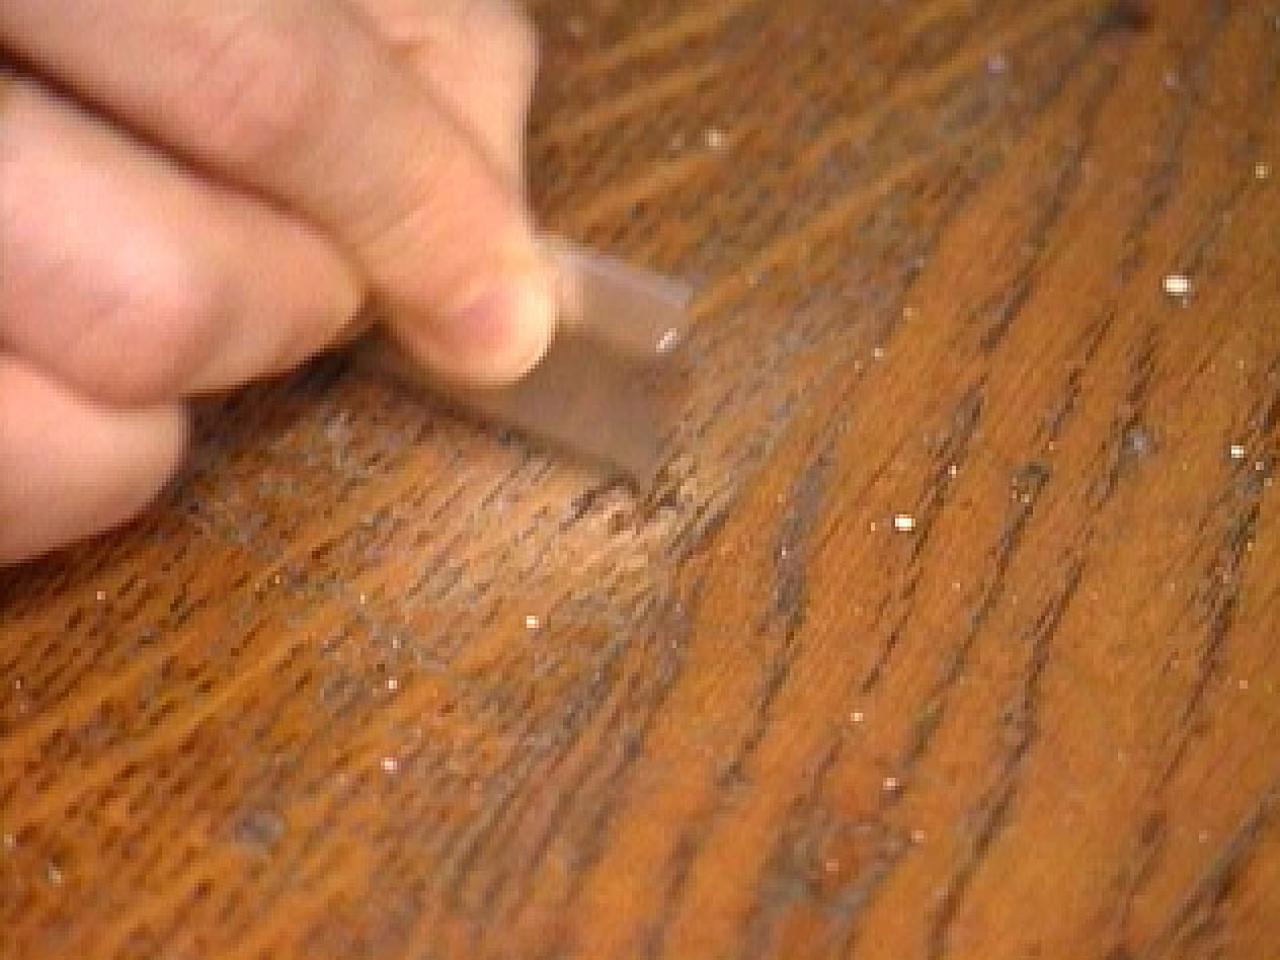 Remove Burn Marks On A Hardwood Floor, How To Get Rid Of Black Scuff Marks On Hardwood Floors